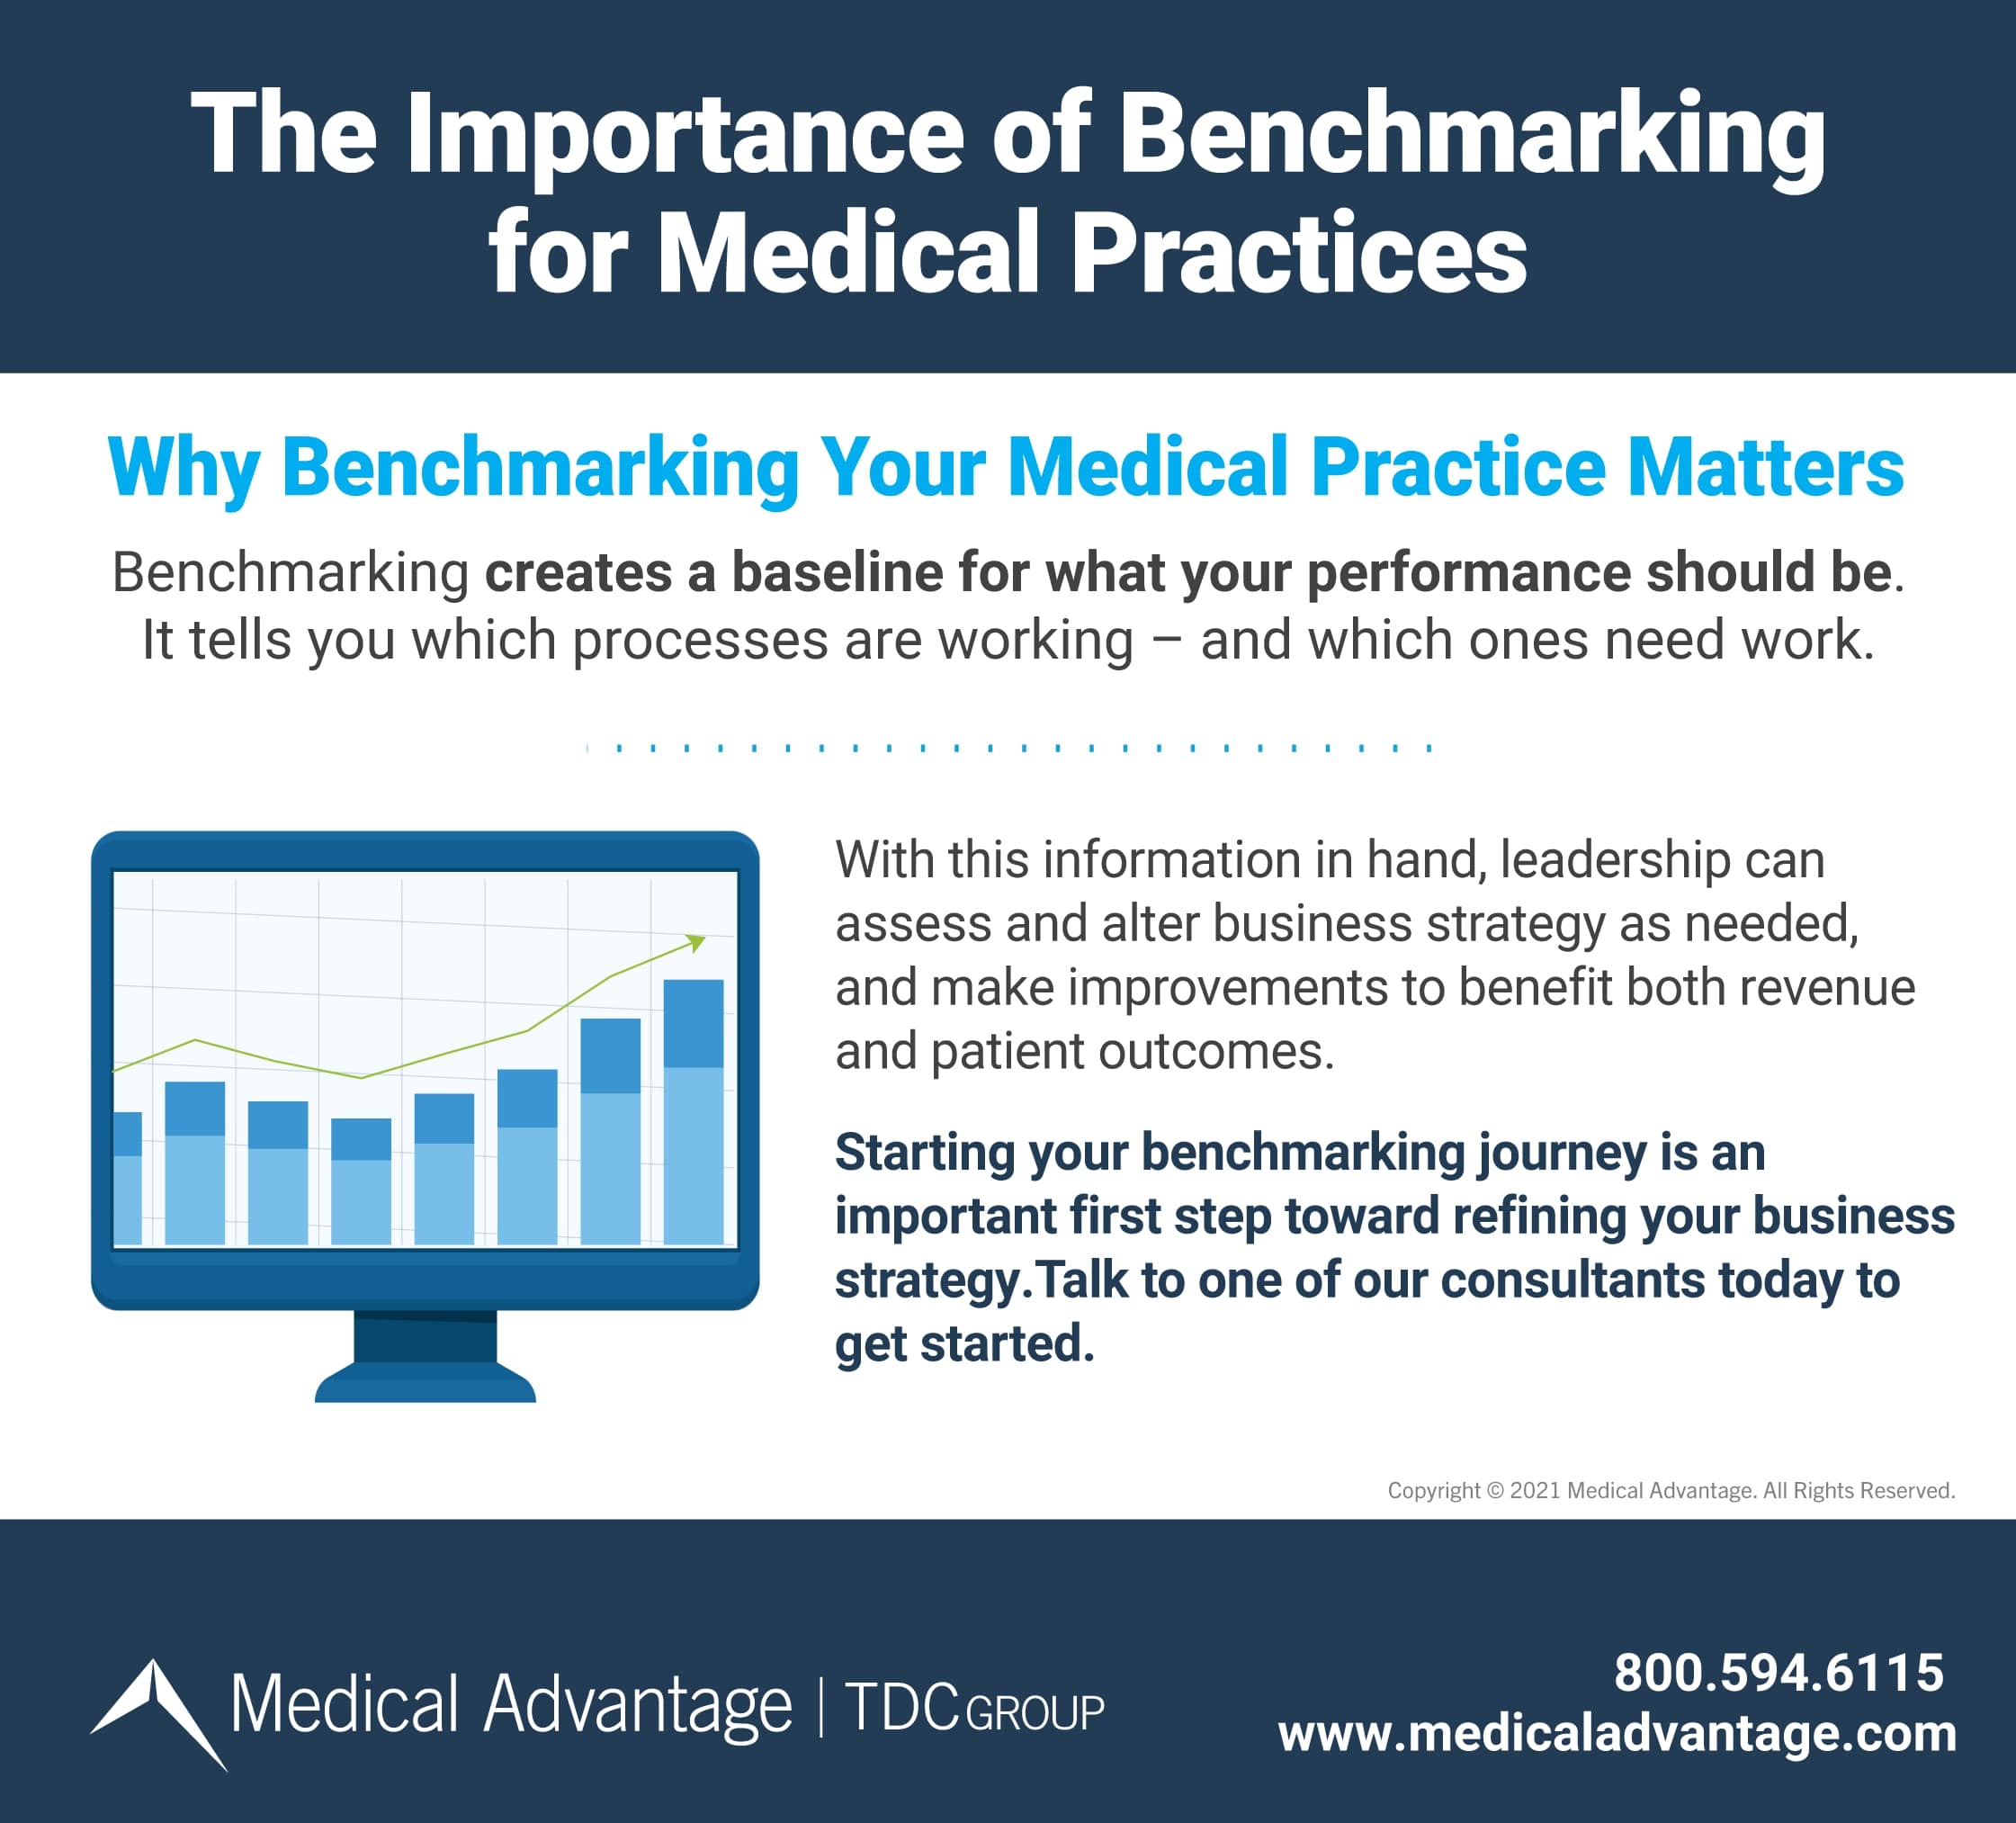 The Importance of Benchmarking for Medical Practice Infographic